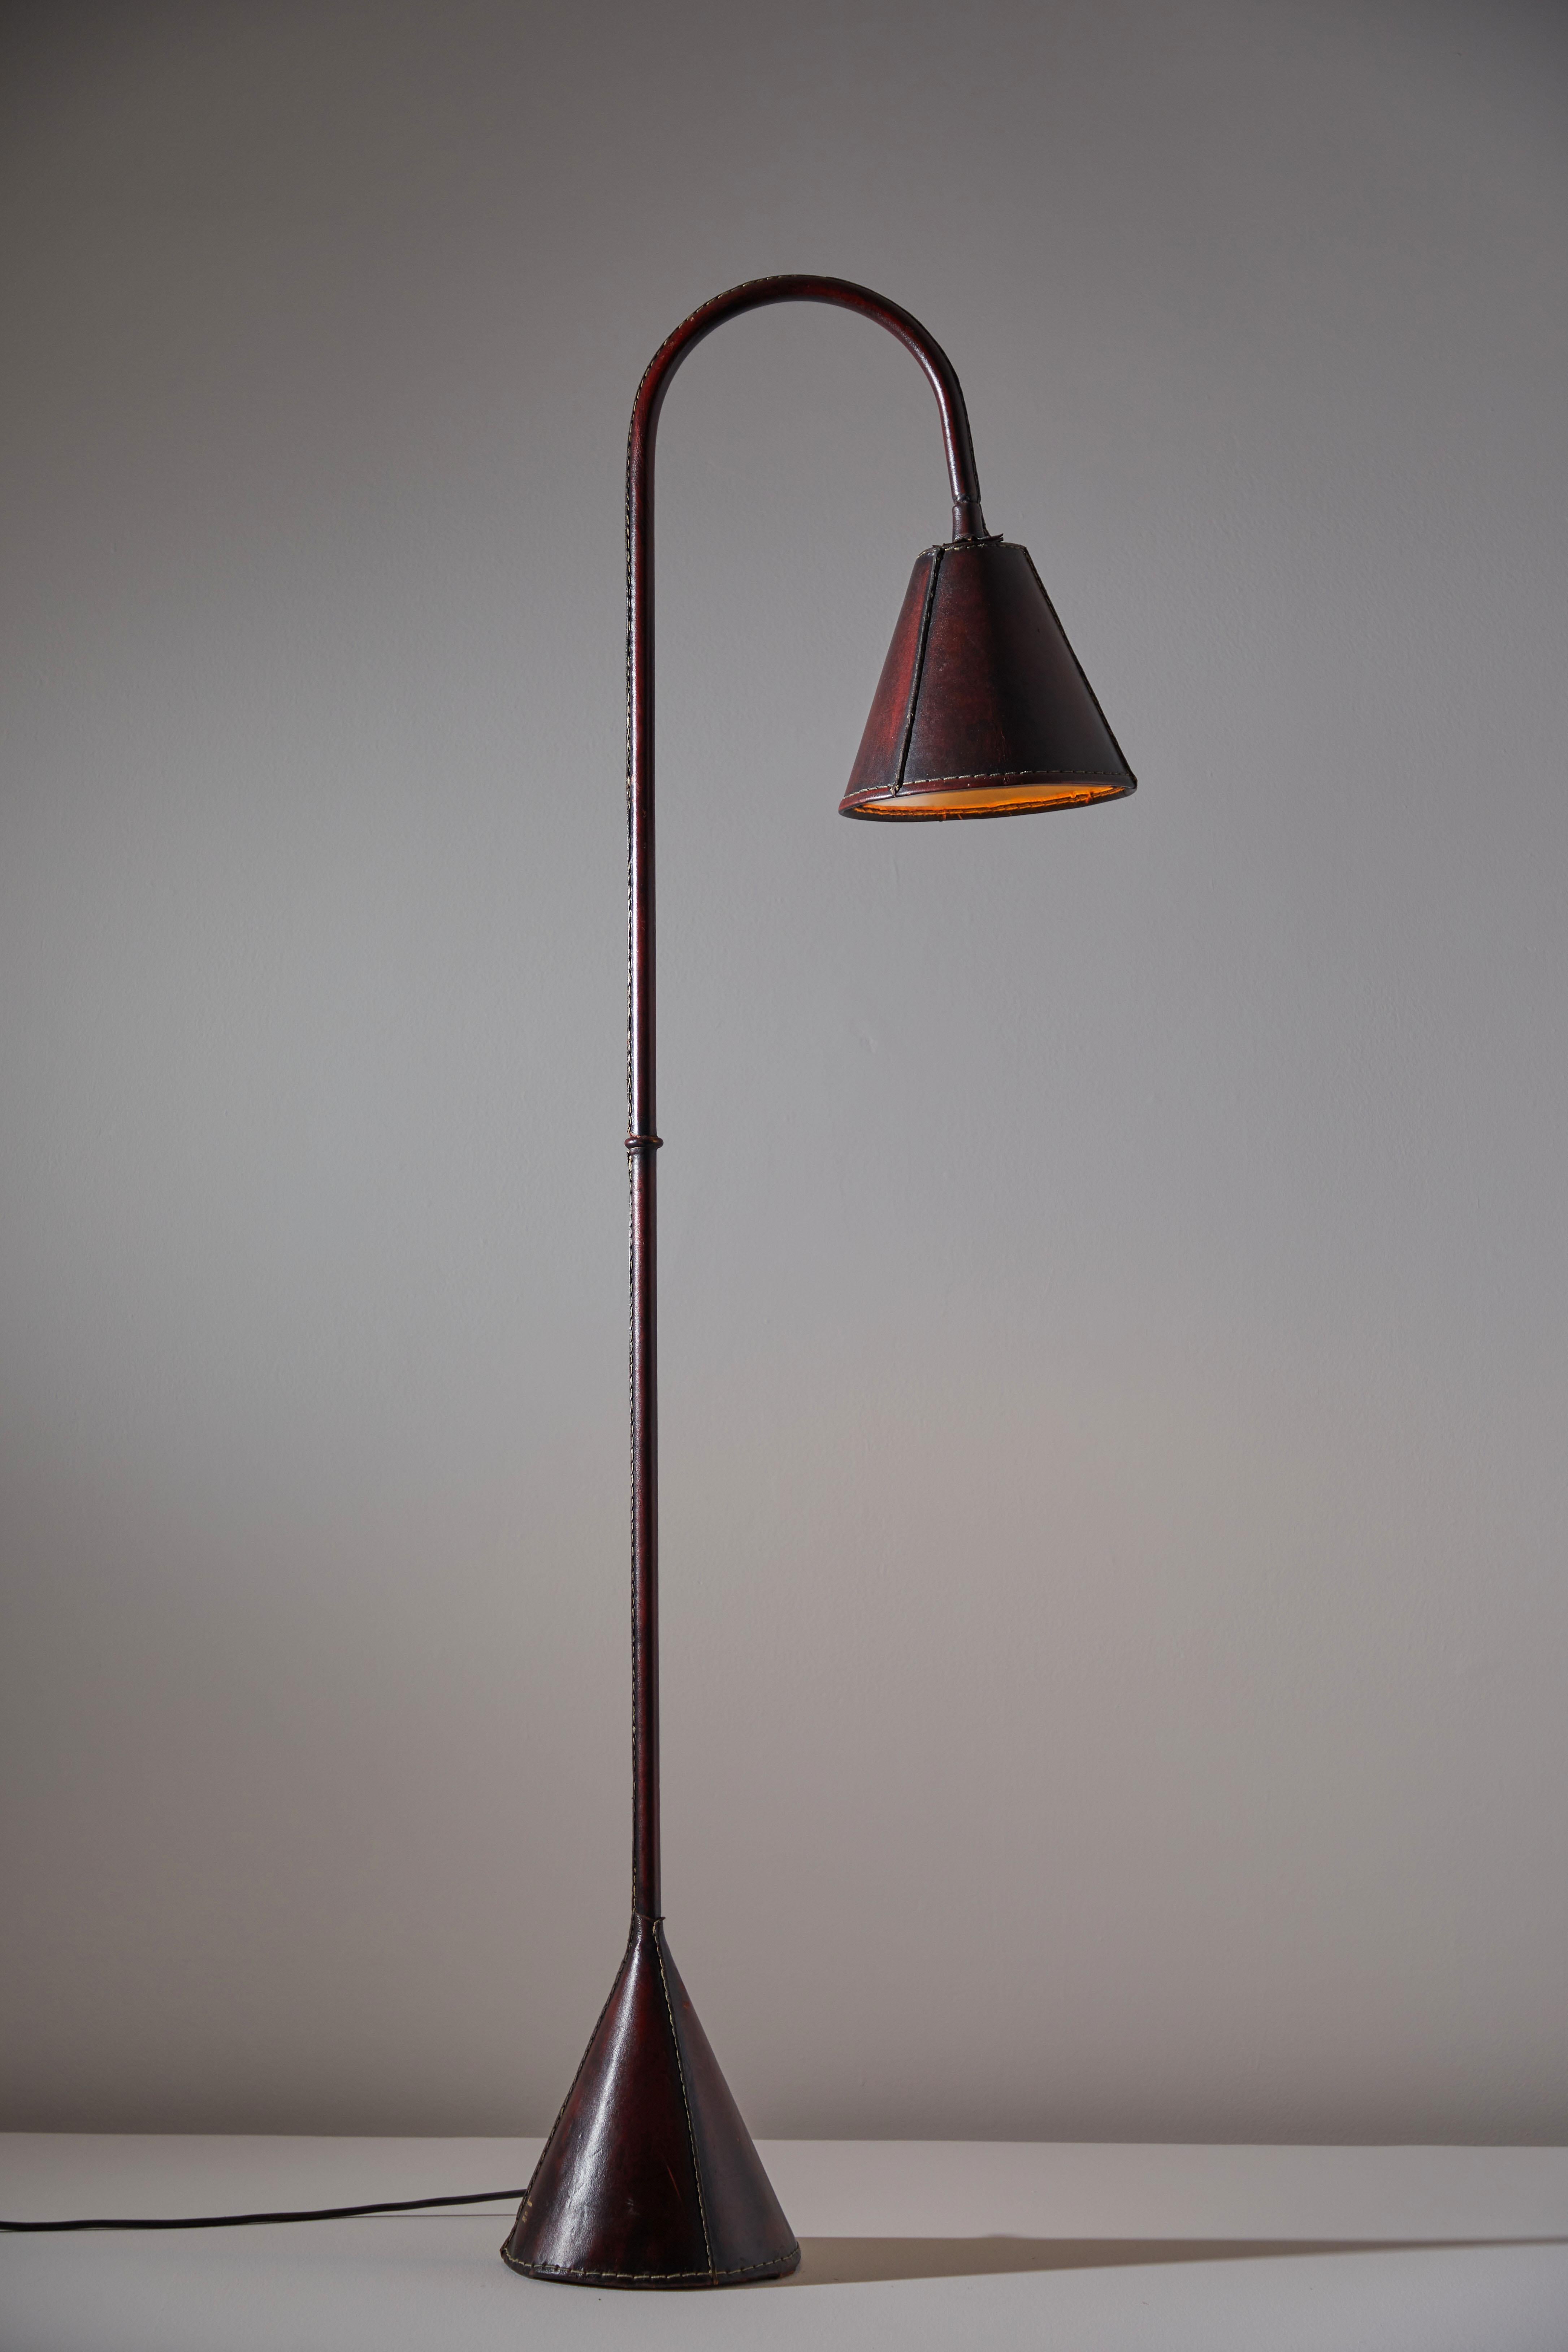 Floor lamp by Valenti. Manufactured in Spain, circa 1960s. Saddle-stitched distressed leather over steel. Shade articulates up/down and left/right. On/off switch on base of lamp. Rewired for U.S. sockets with black French twist cord. We recommend